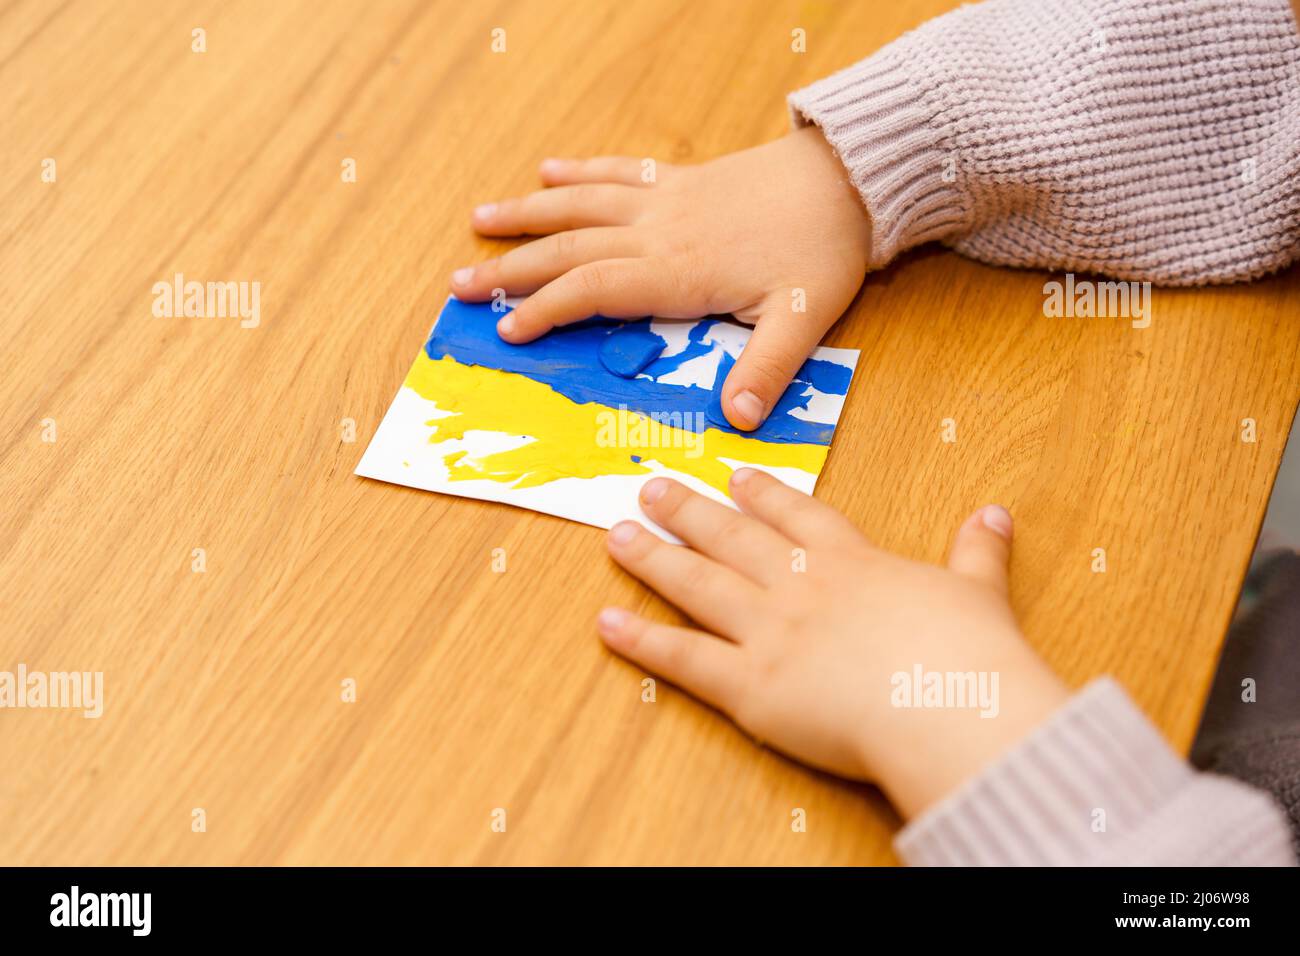 Support for Ukraine. Close up little child hands modeling Ukraine flag from blue and yellow color plasticine. Concept of patriotism, respect, charity, help, solidarity with the citizens of Ukraine. Stock Photo